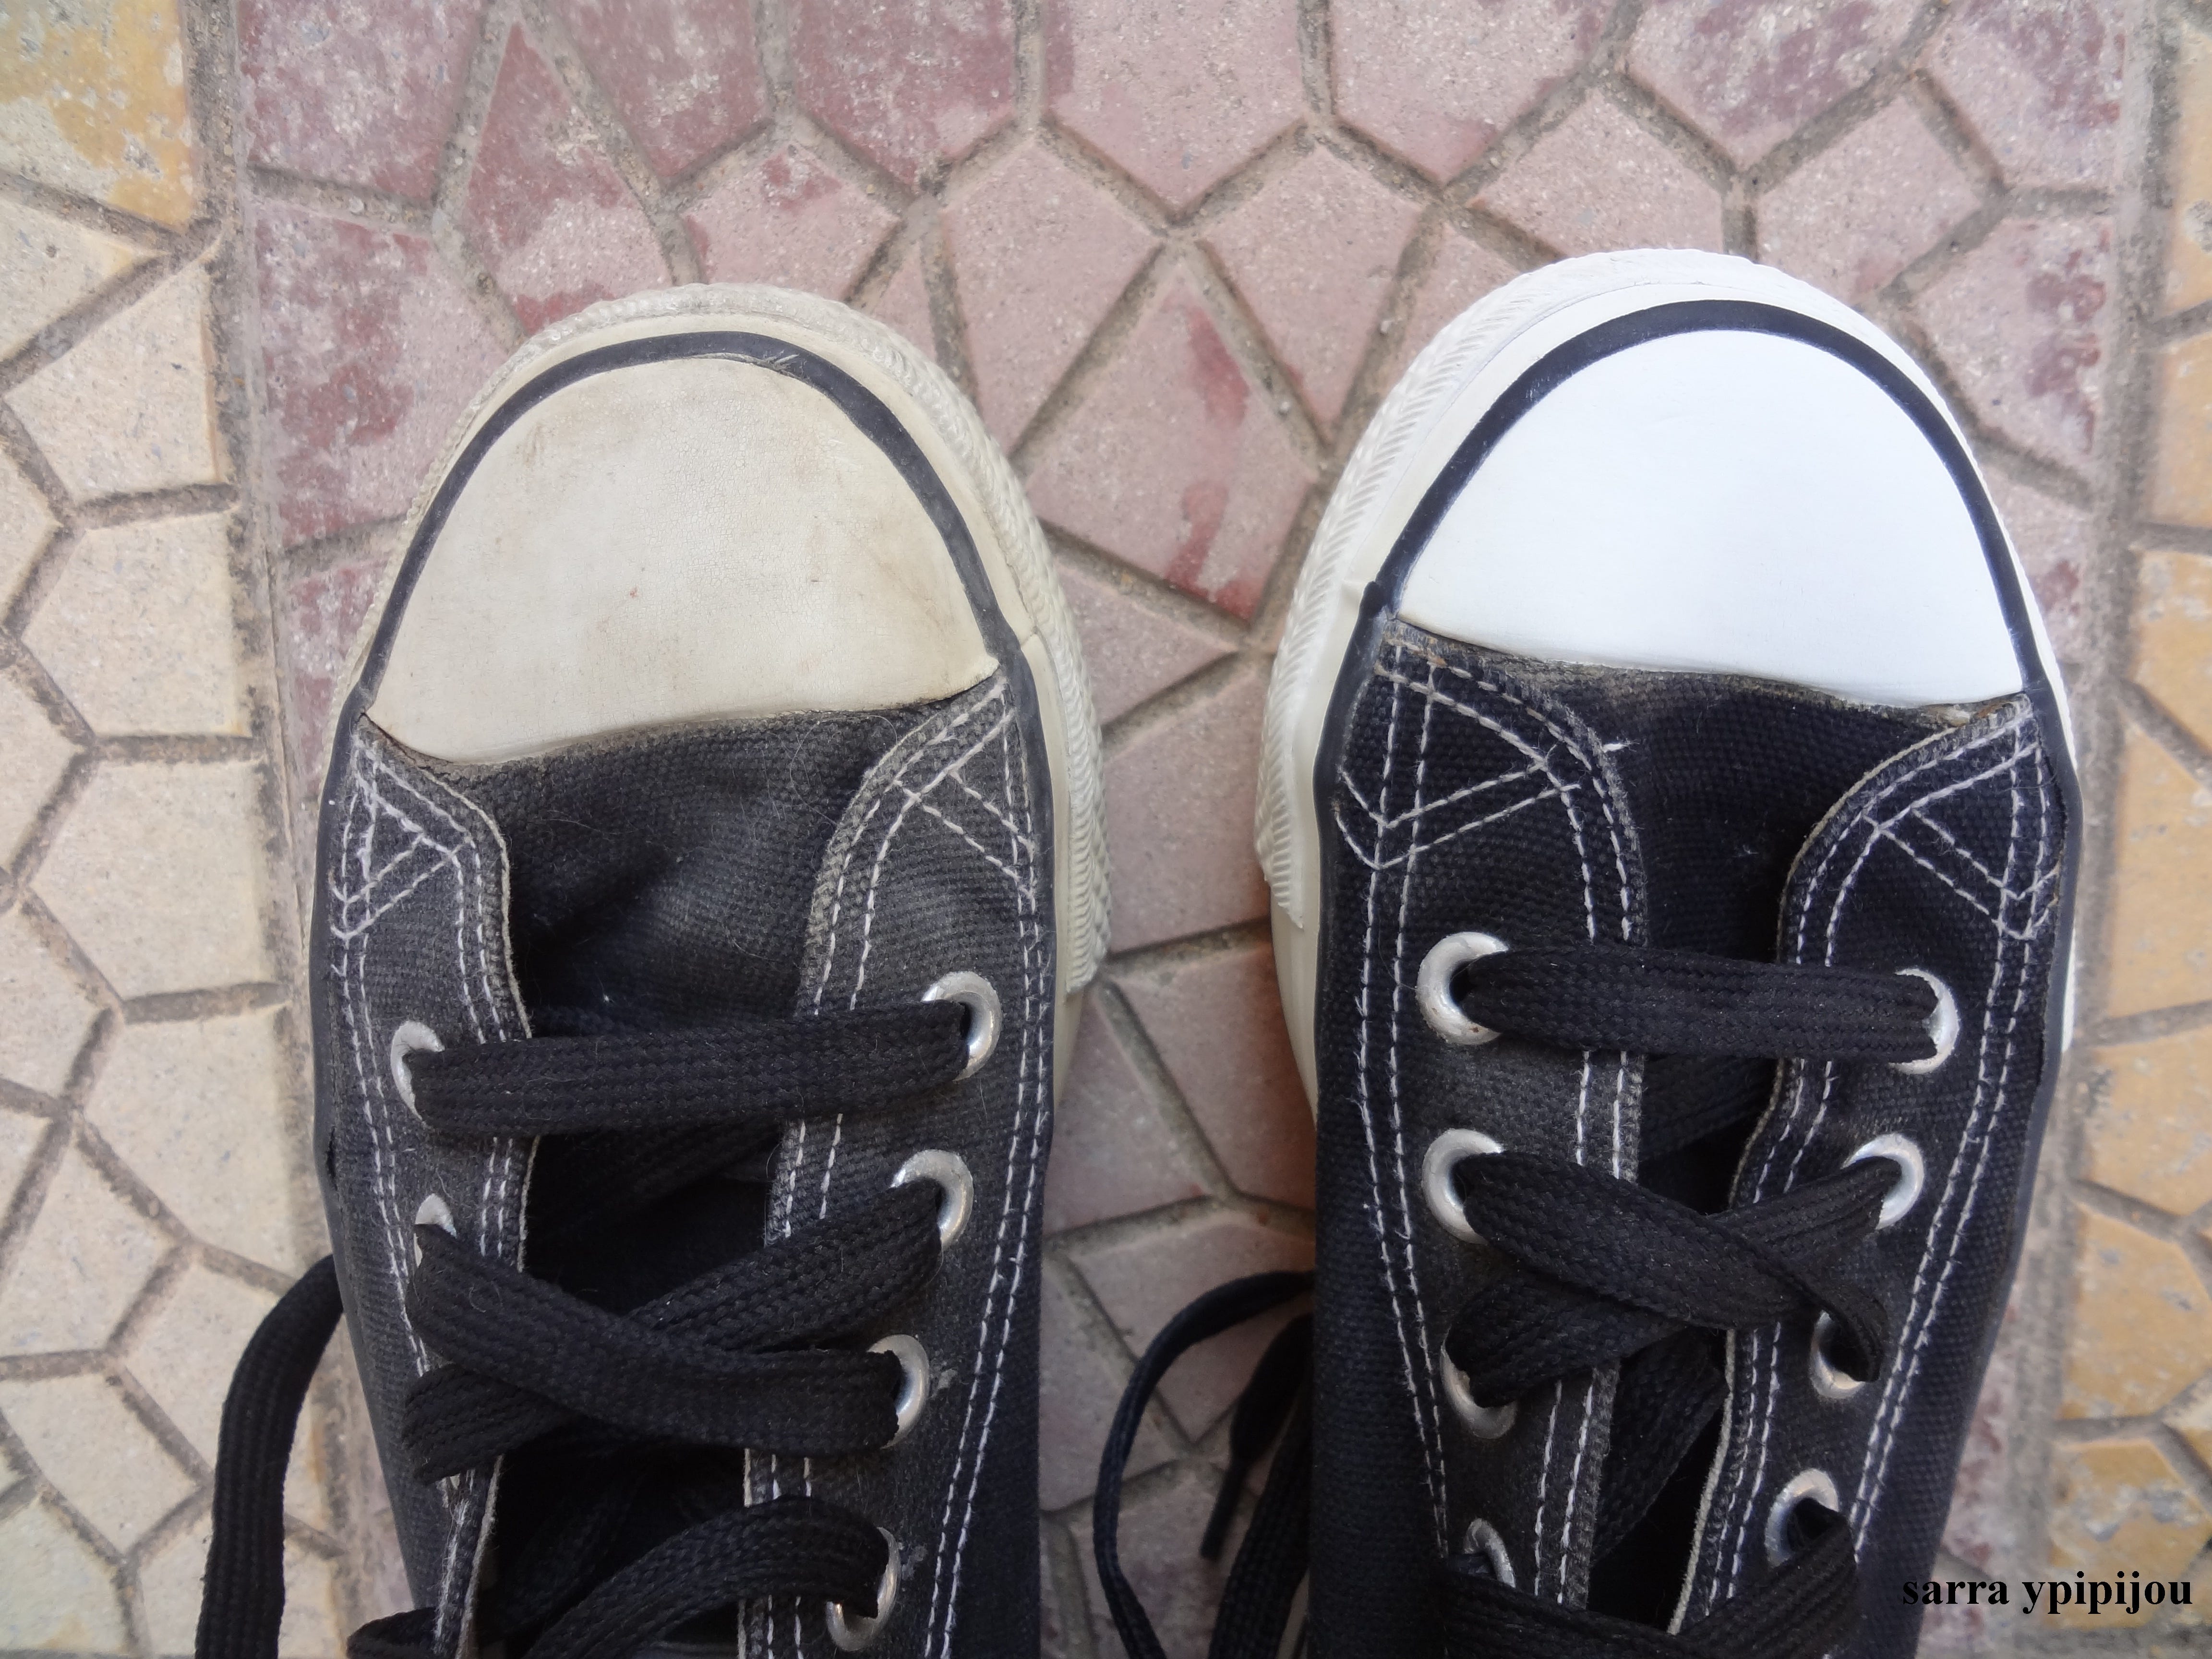 How To Clean Converse Sneakers When 